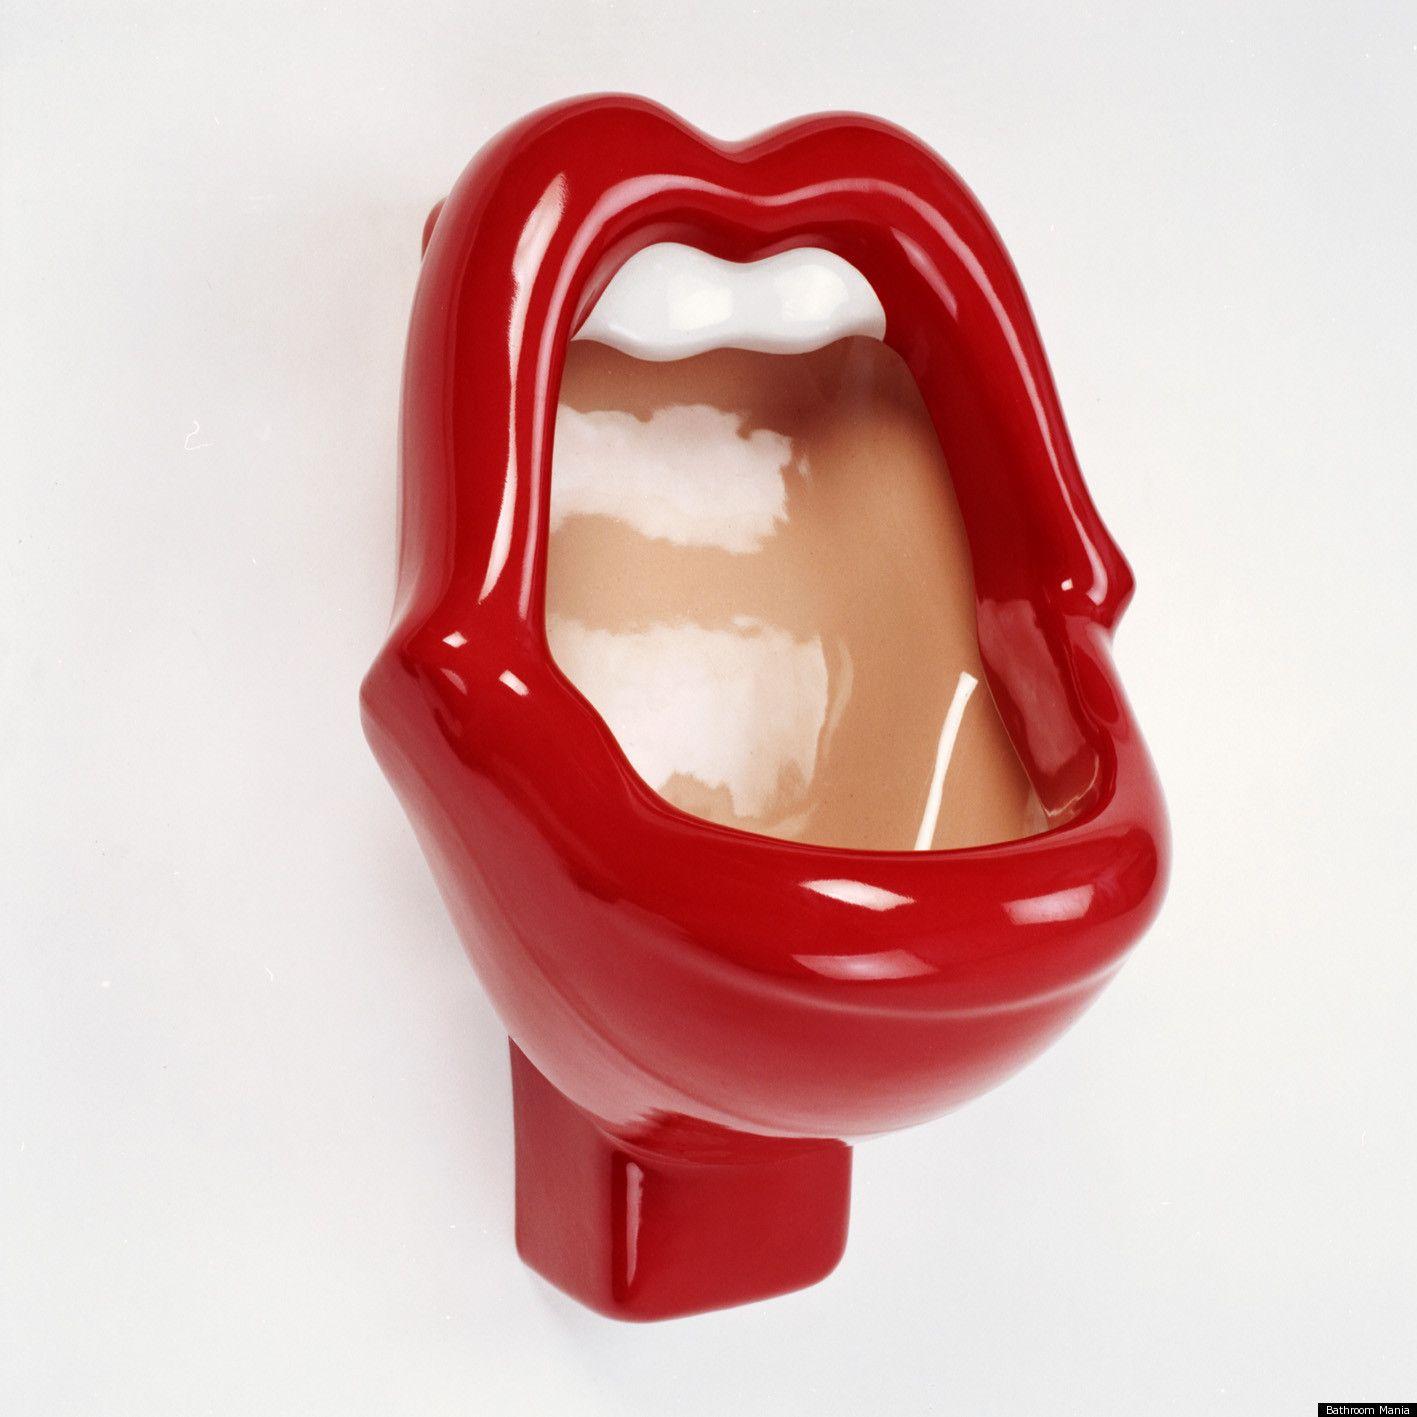 Red Lips and Tongue Logo - Rolling Stone Mouth-Shaped Urinals Called Sexist (PHOTOS) | HuffPost